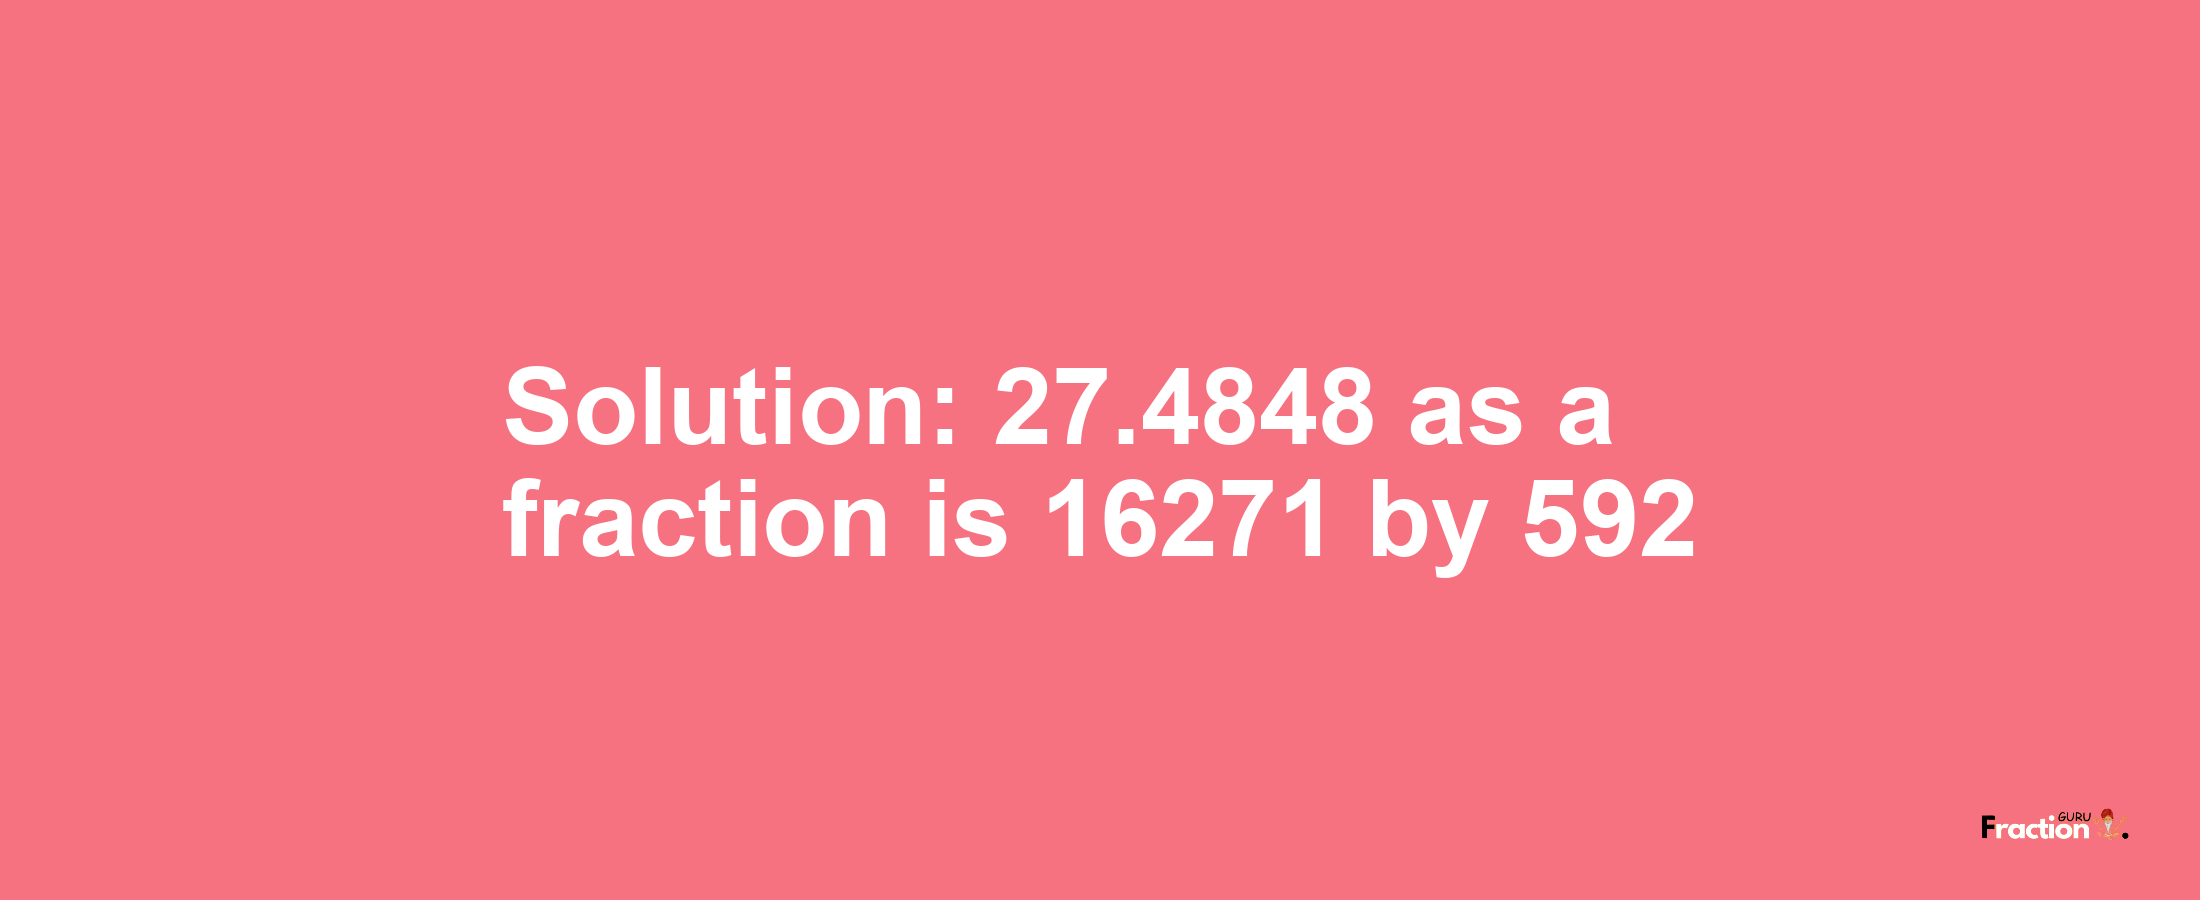 Solution:27.4848 as a fraction is 16271/592